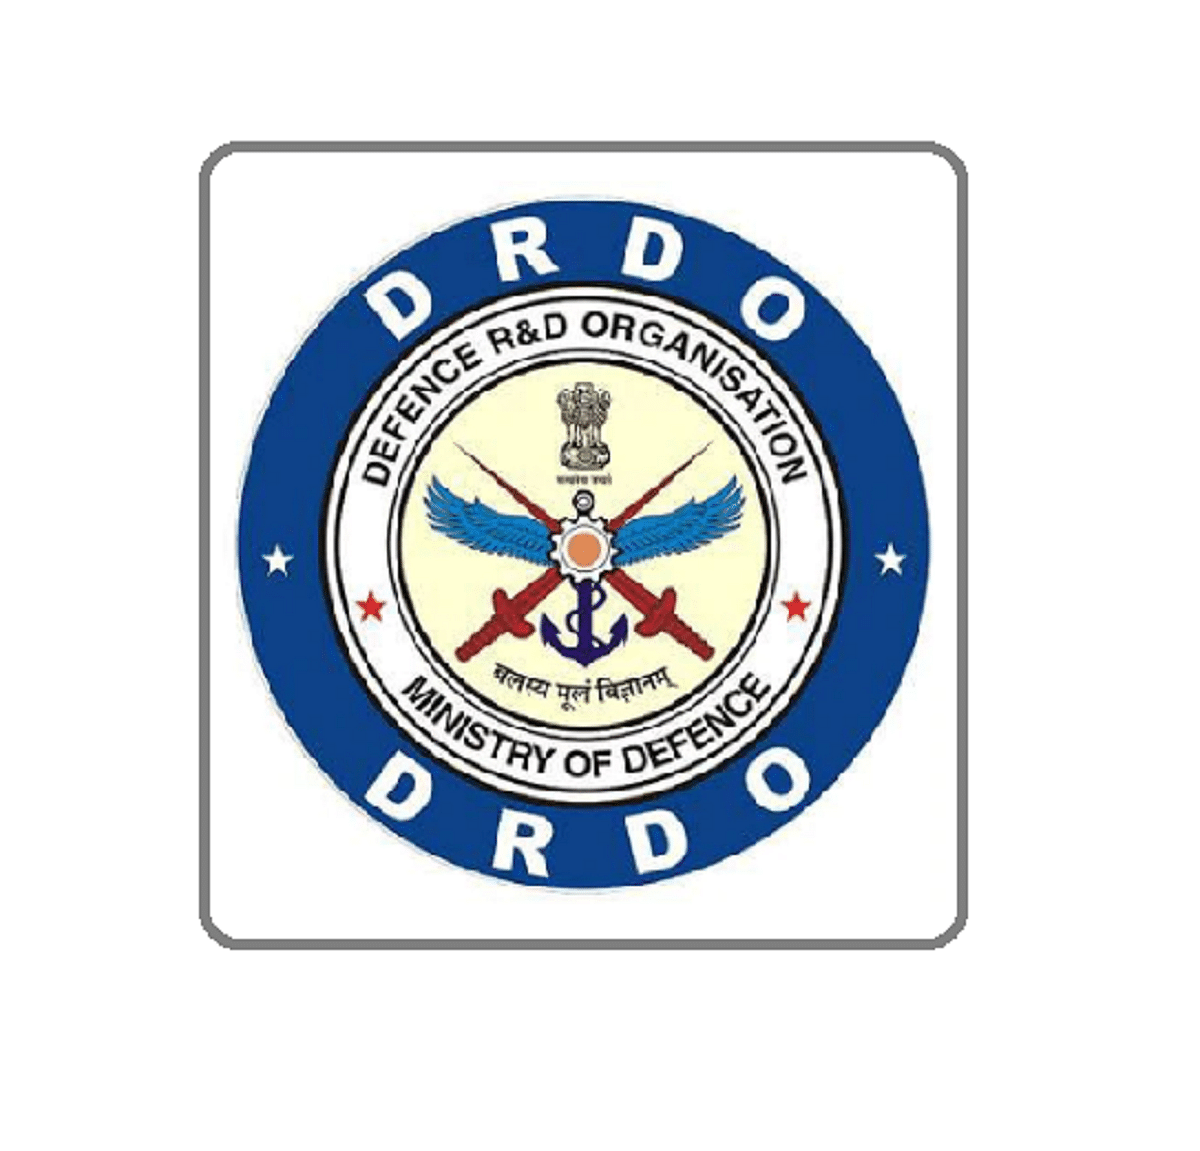 DRDO Scientist Recruitment 2020: Applications are invited for 167 Posts, Last Date in July